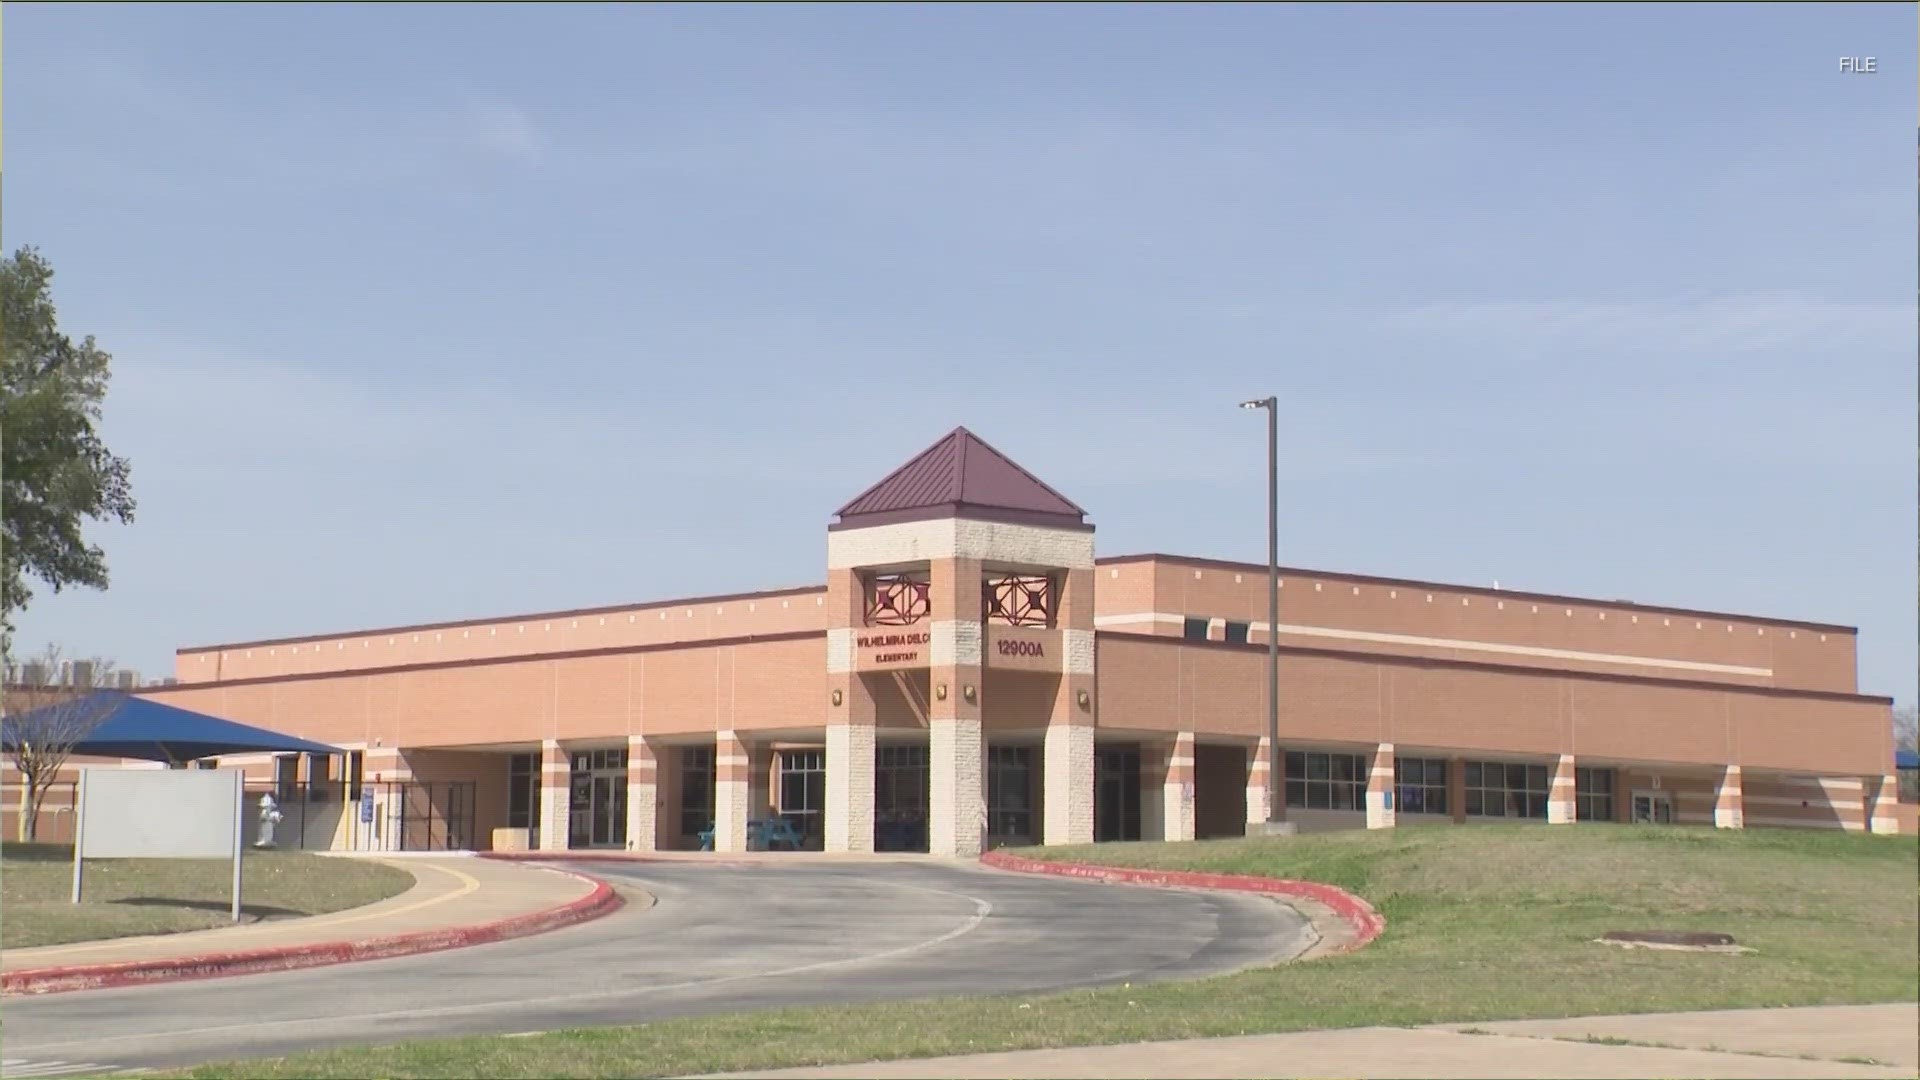 Pflugerville ISD leaders are making some hard decisions about cutting and changing school programs to save money.